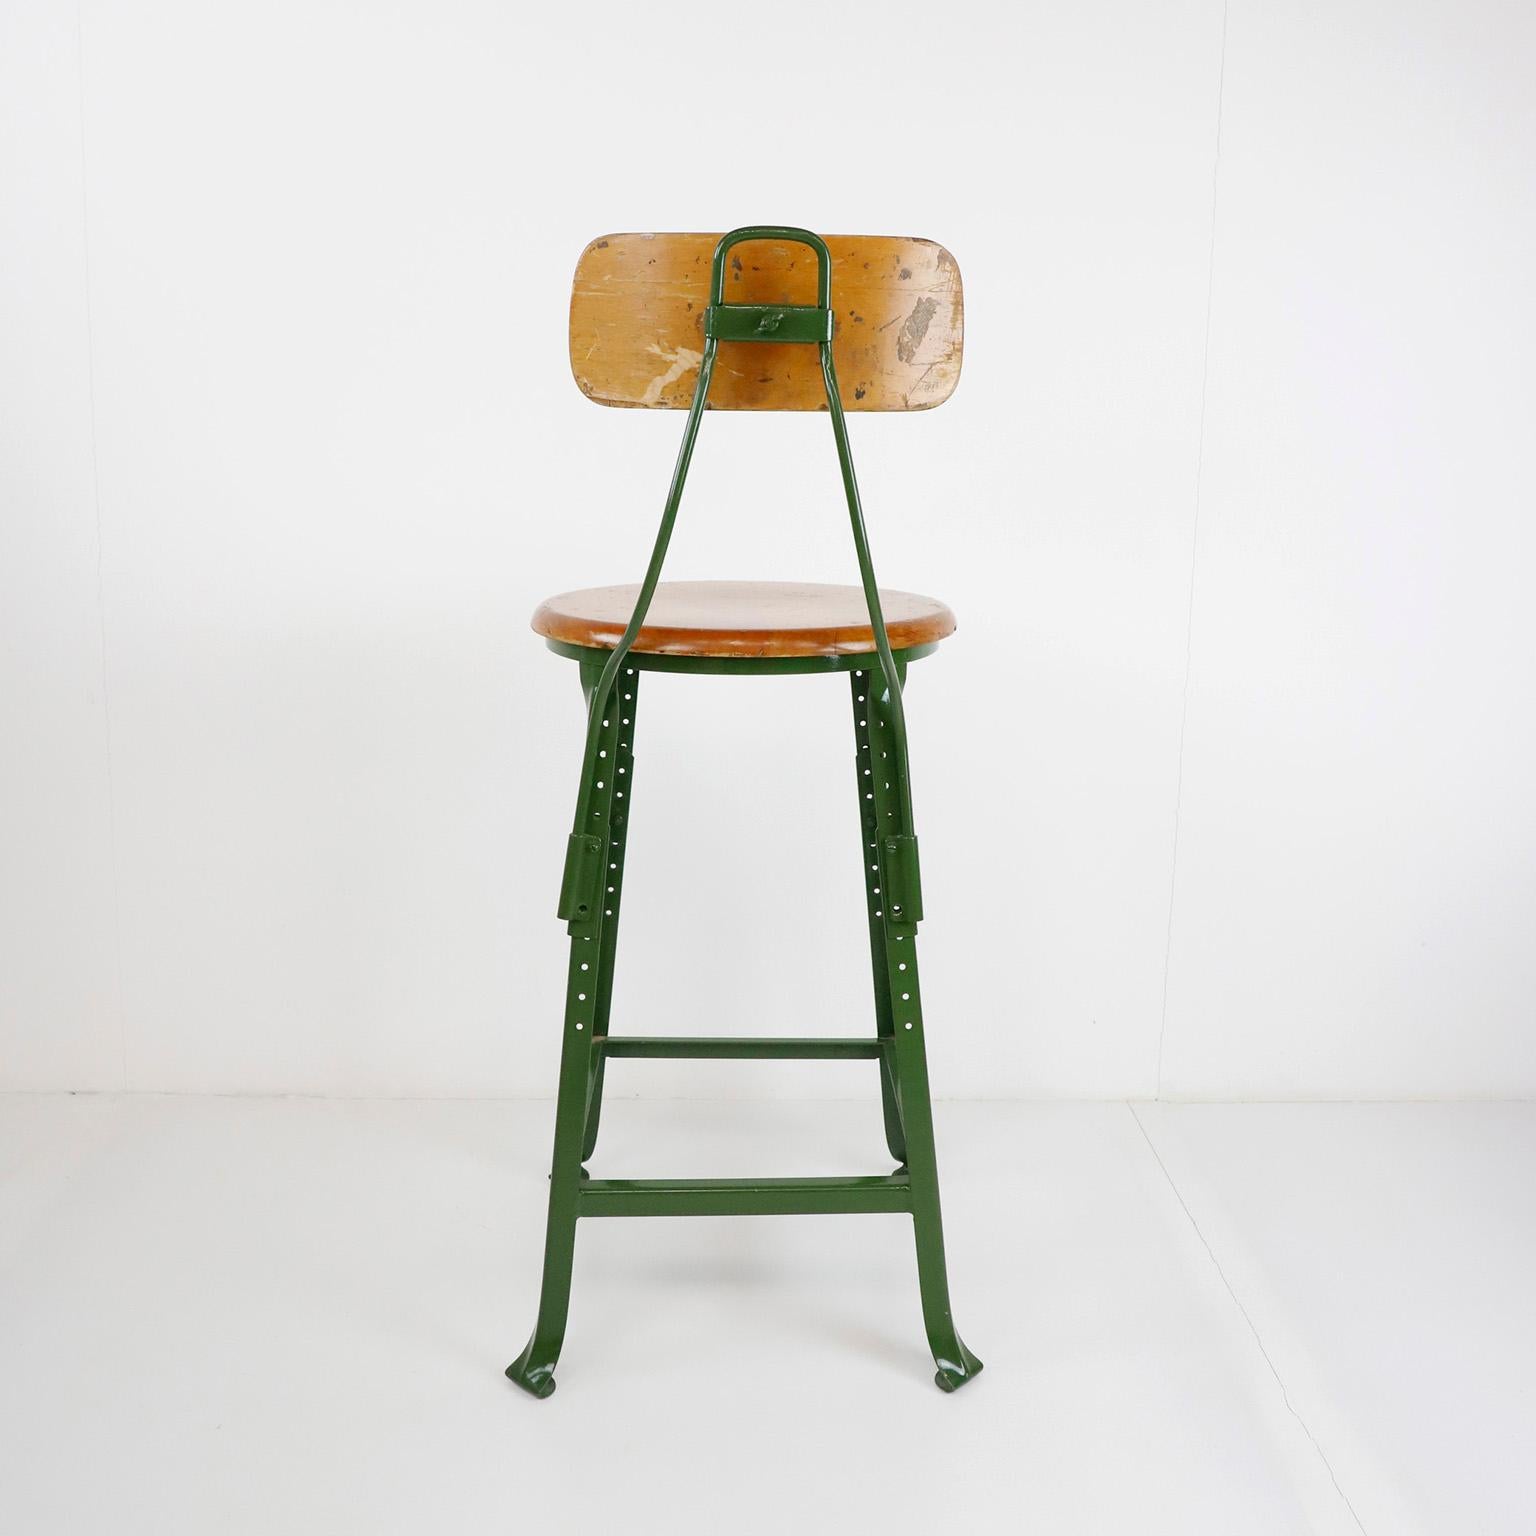 Authentic Vintage Industrial Factory Stool In Good Condition For Sale In Mexico City, CDMX